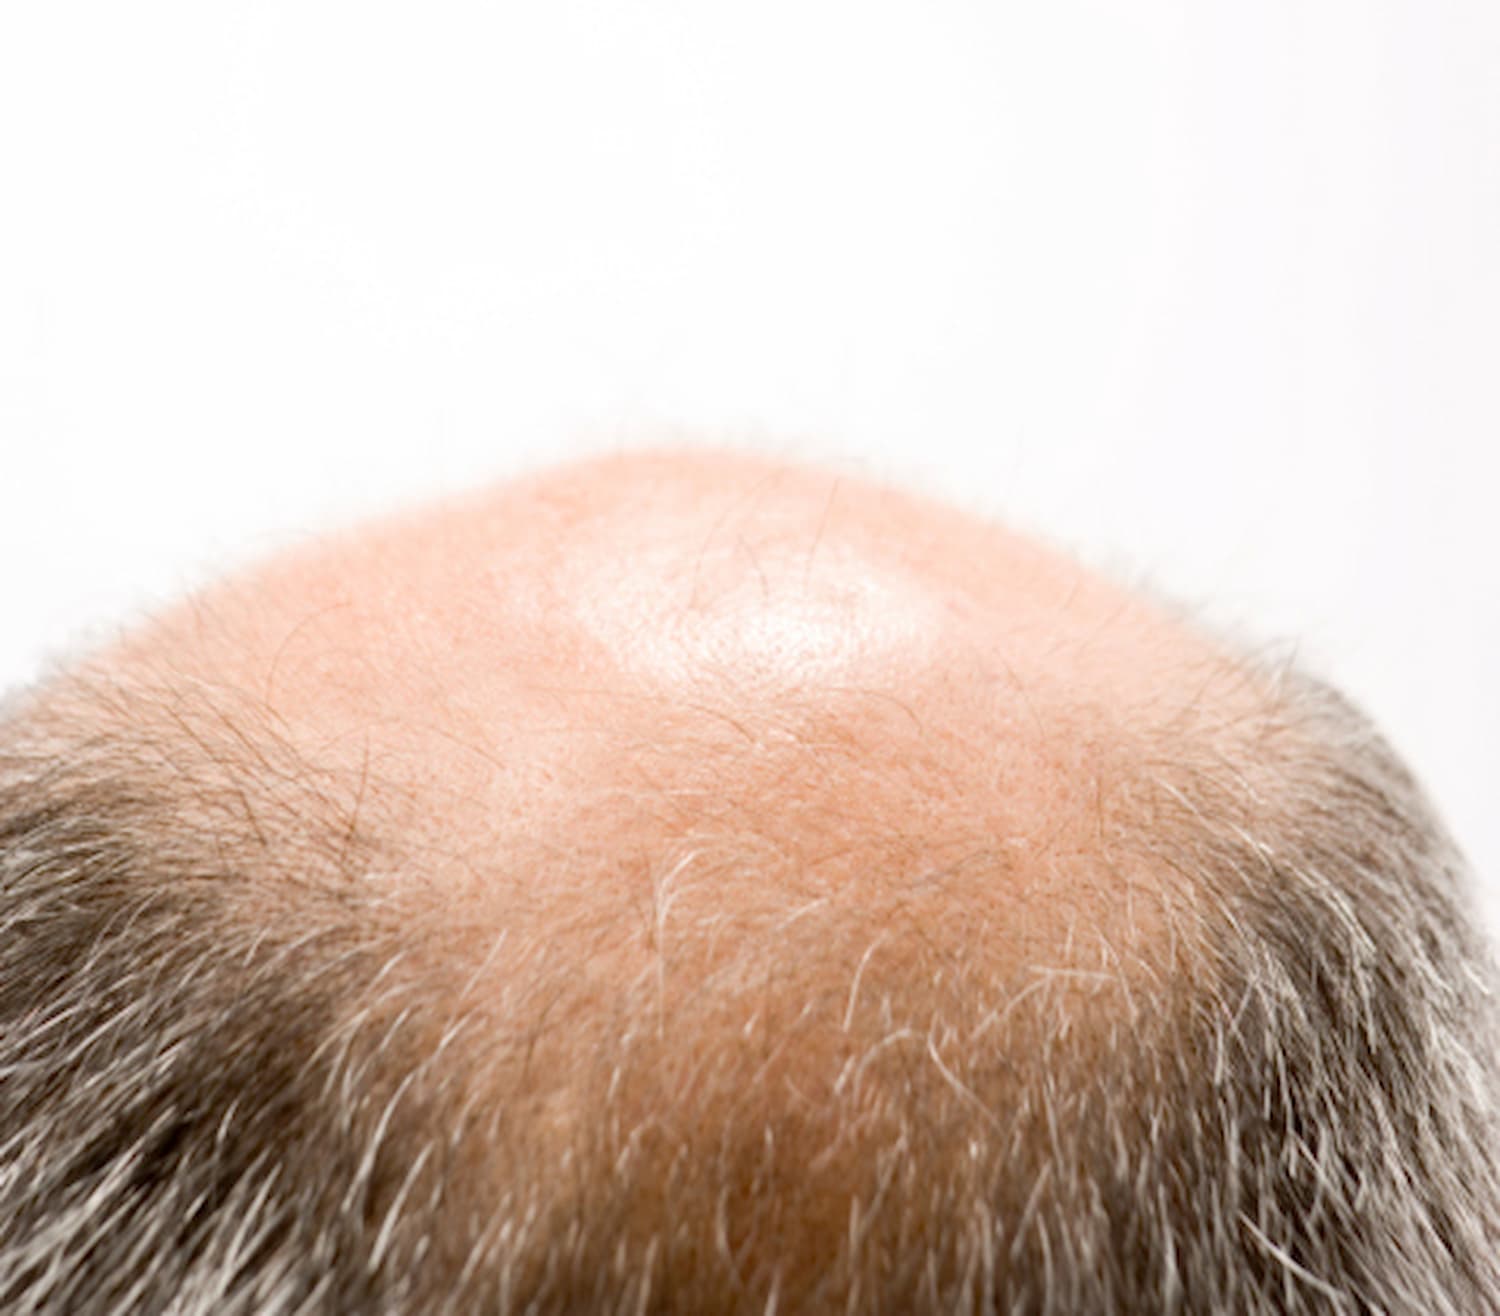 The Truth Behind Male Pattern Baldness